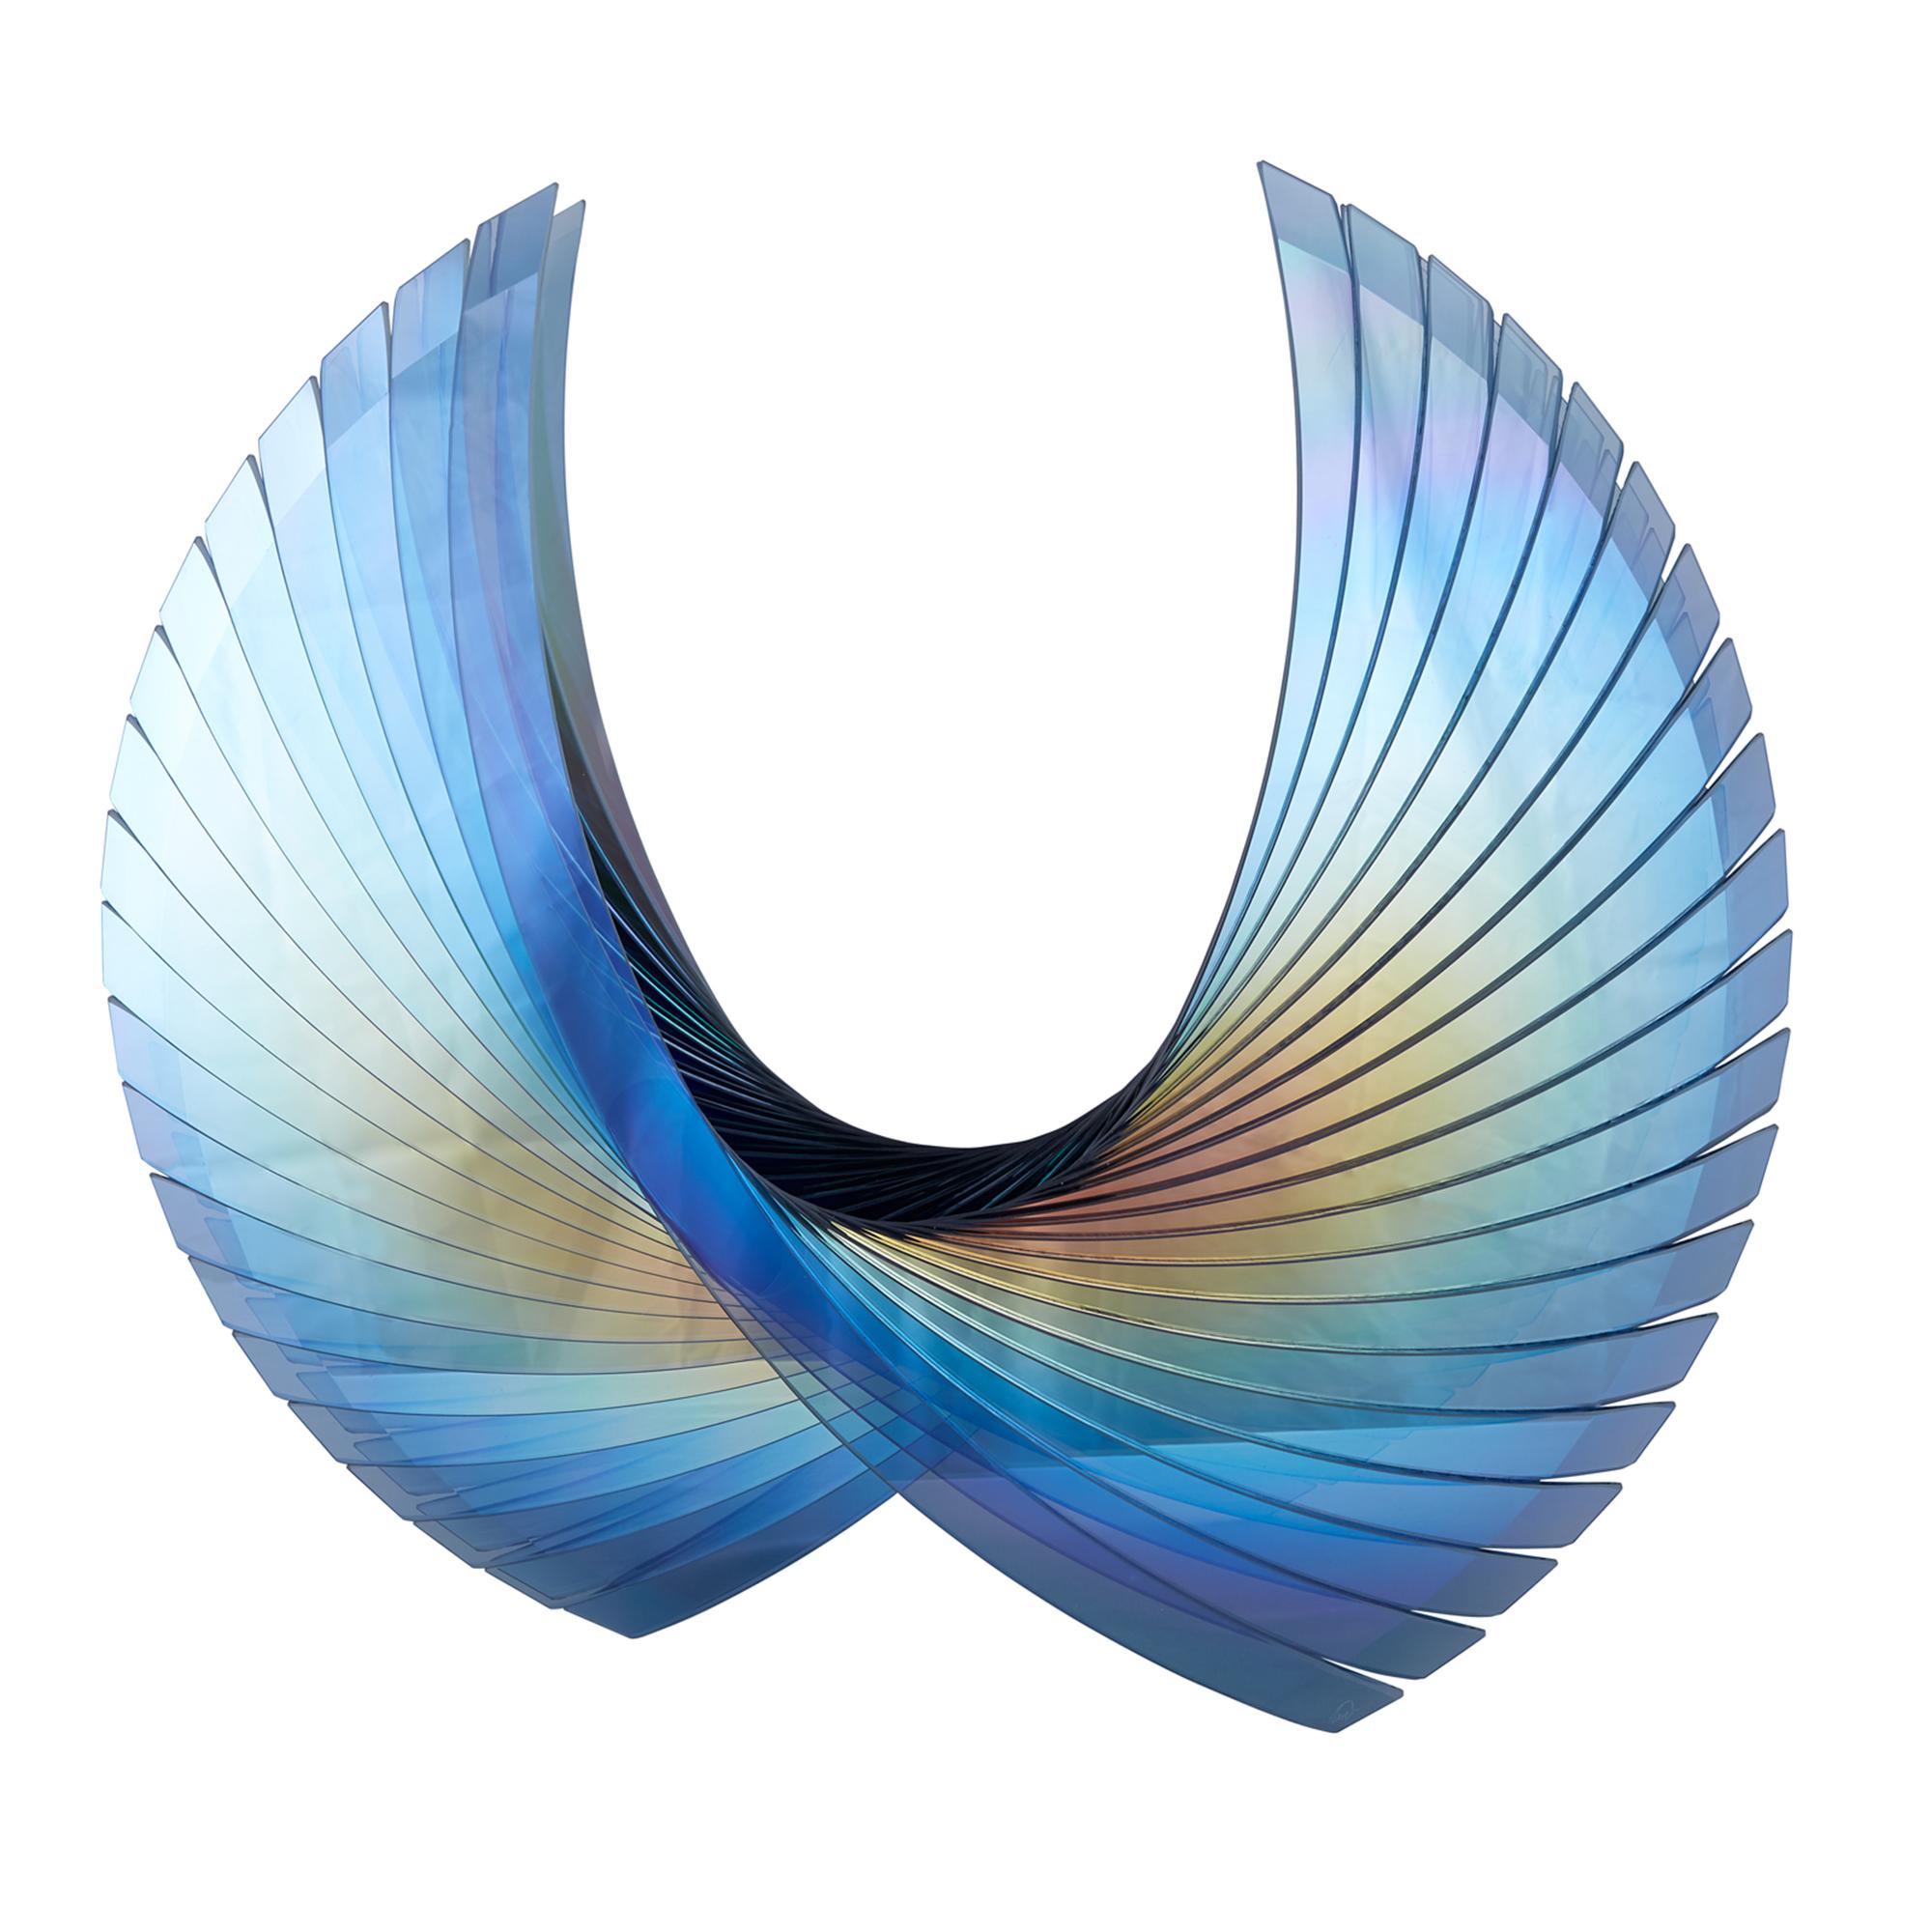 Tom Marosz Abstract Sculpture - 'Wings Dichroic Blue', Fused, Cut and Polished Dichroic Glass Sculpture